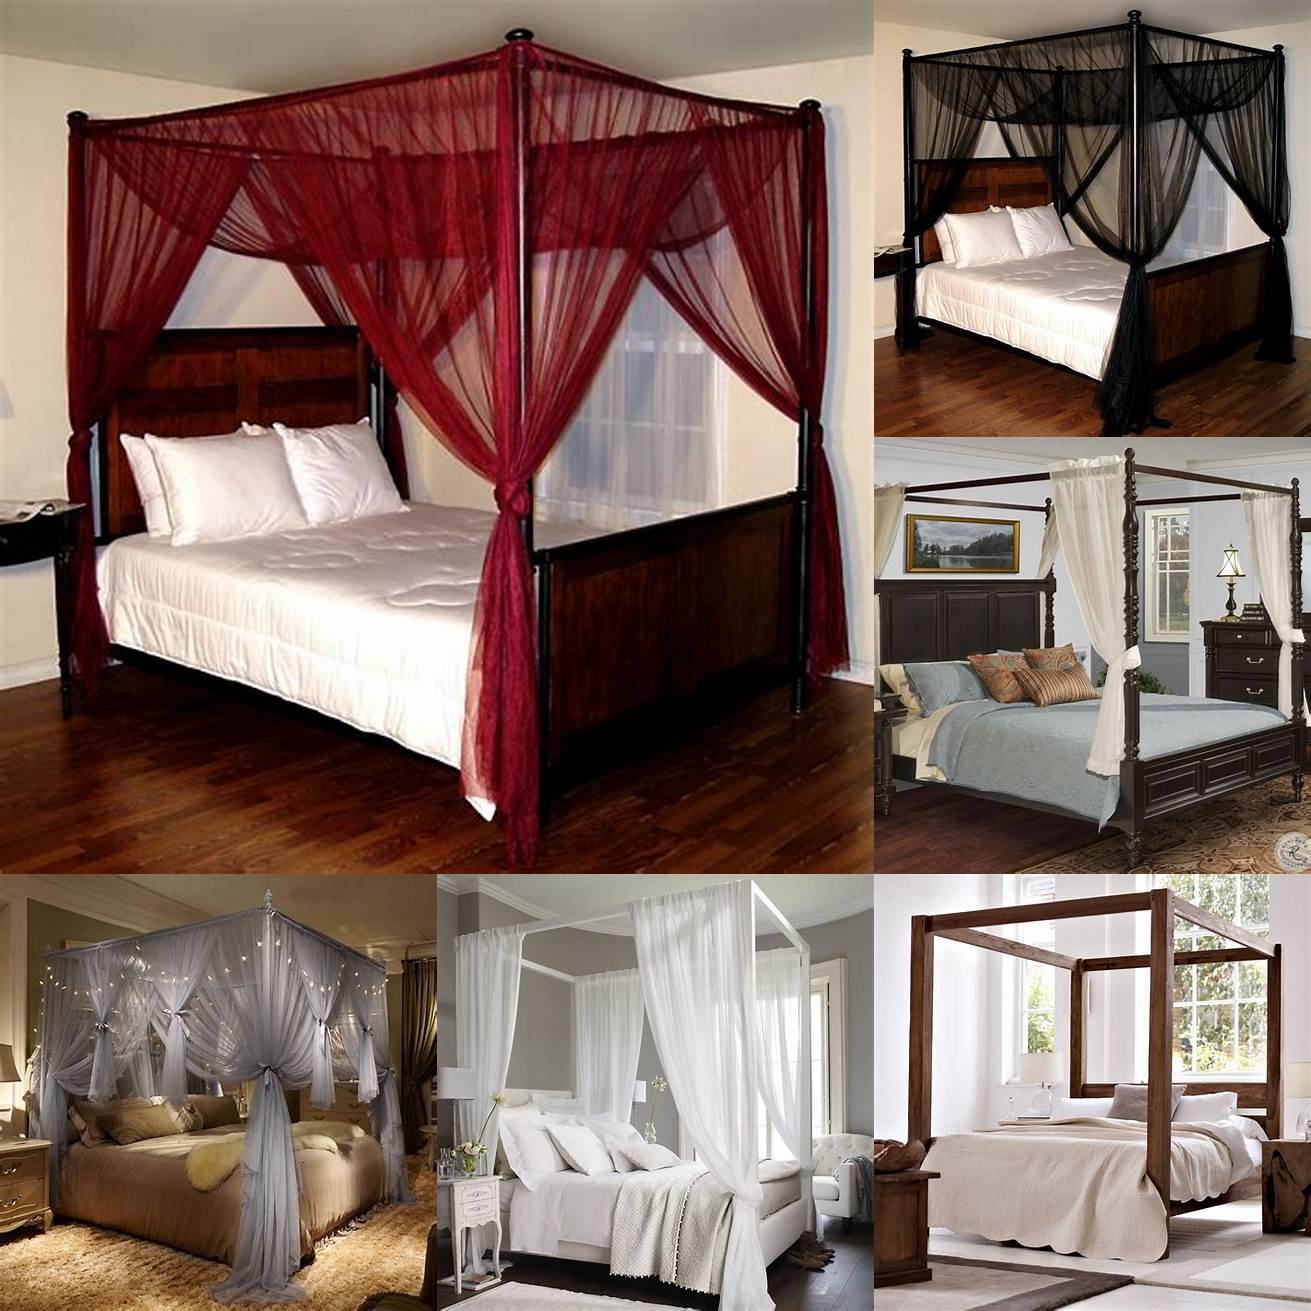 Canopy Add a touch of drama and romance to your king poster bed with a canopy Hang sheer fabric or drapes from the posts to create a cozy and intimate space